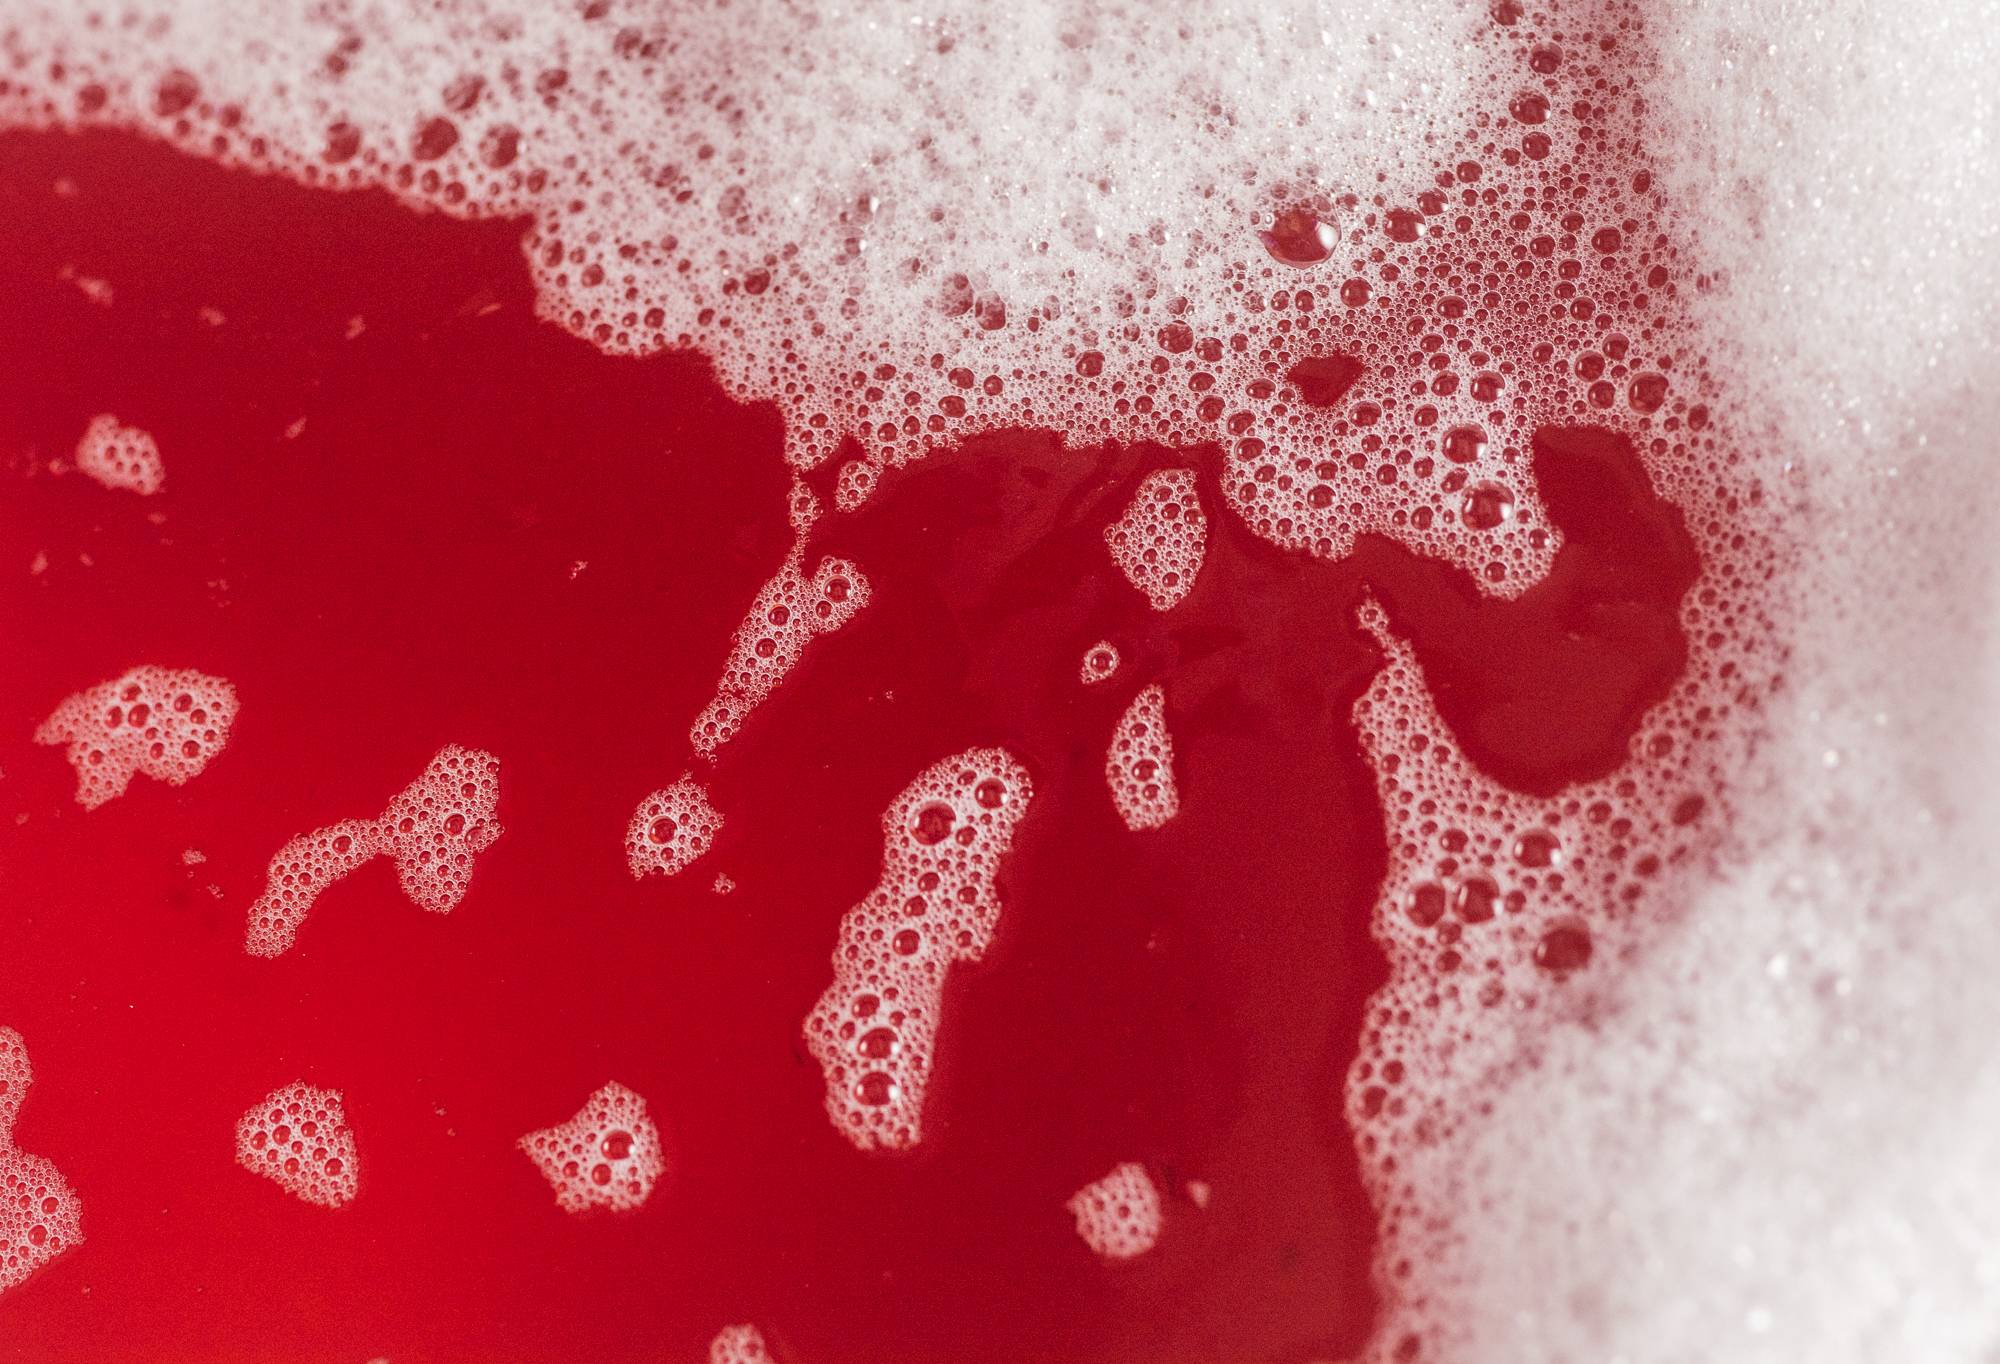 Image shows deep, blood-red coloured bathwater framed by thick bubbles.